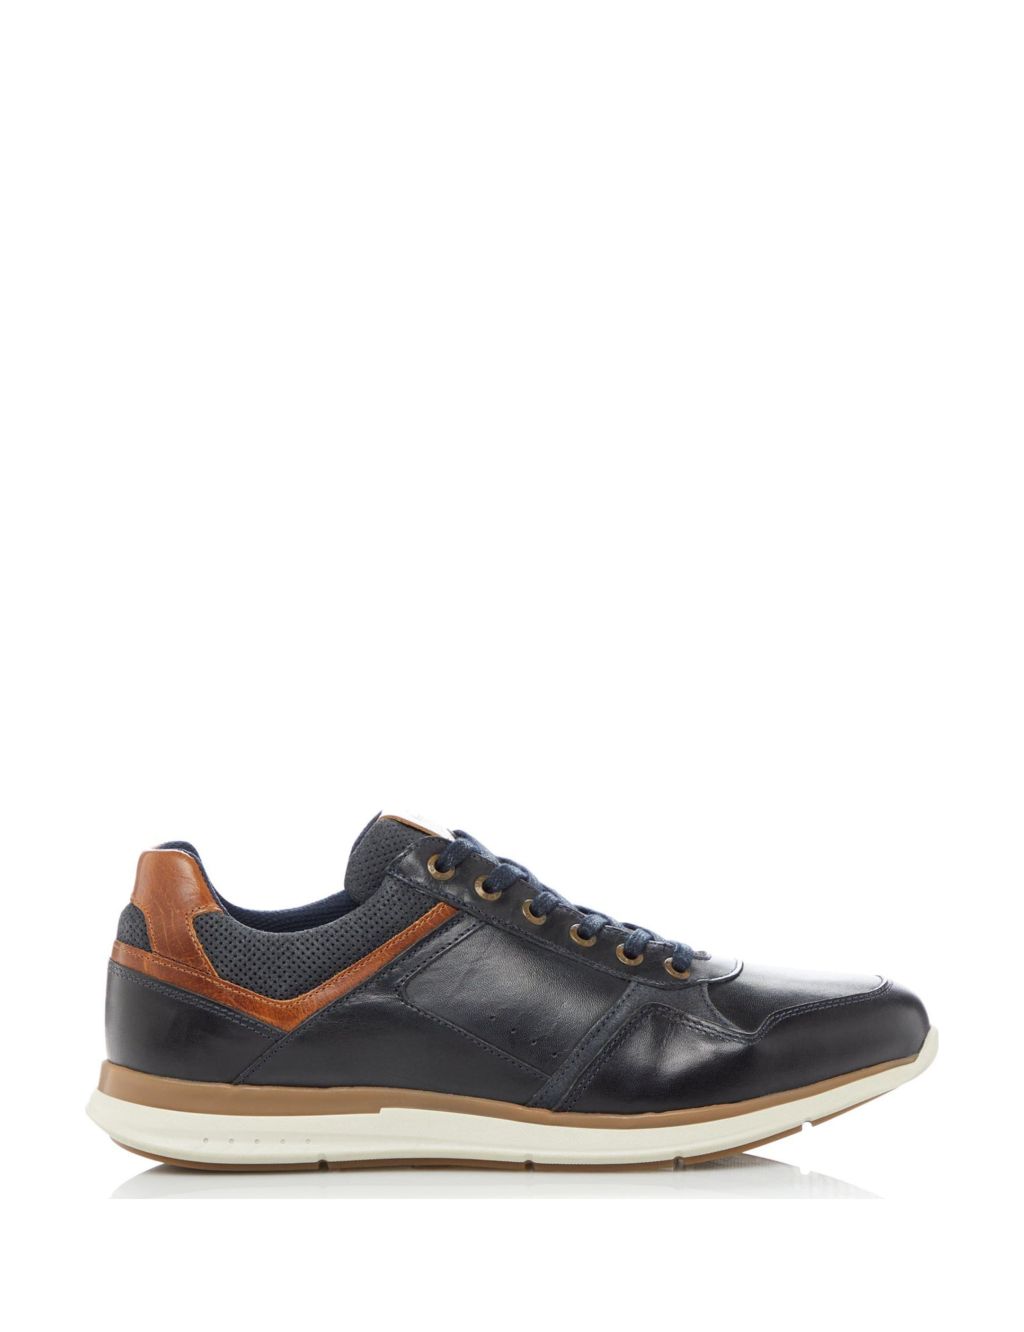 Leather Lace-Up Trainers image 1